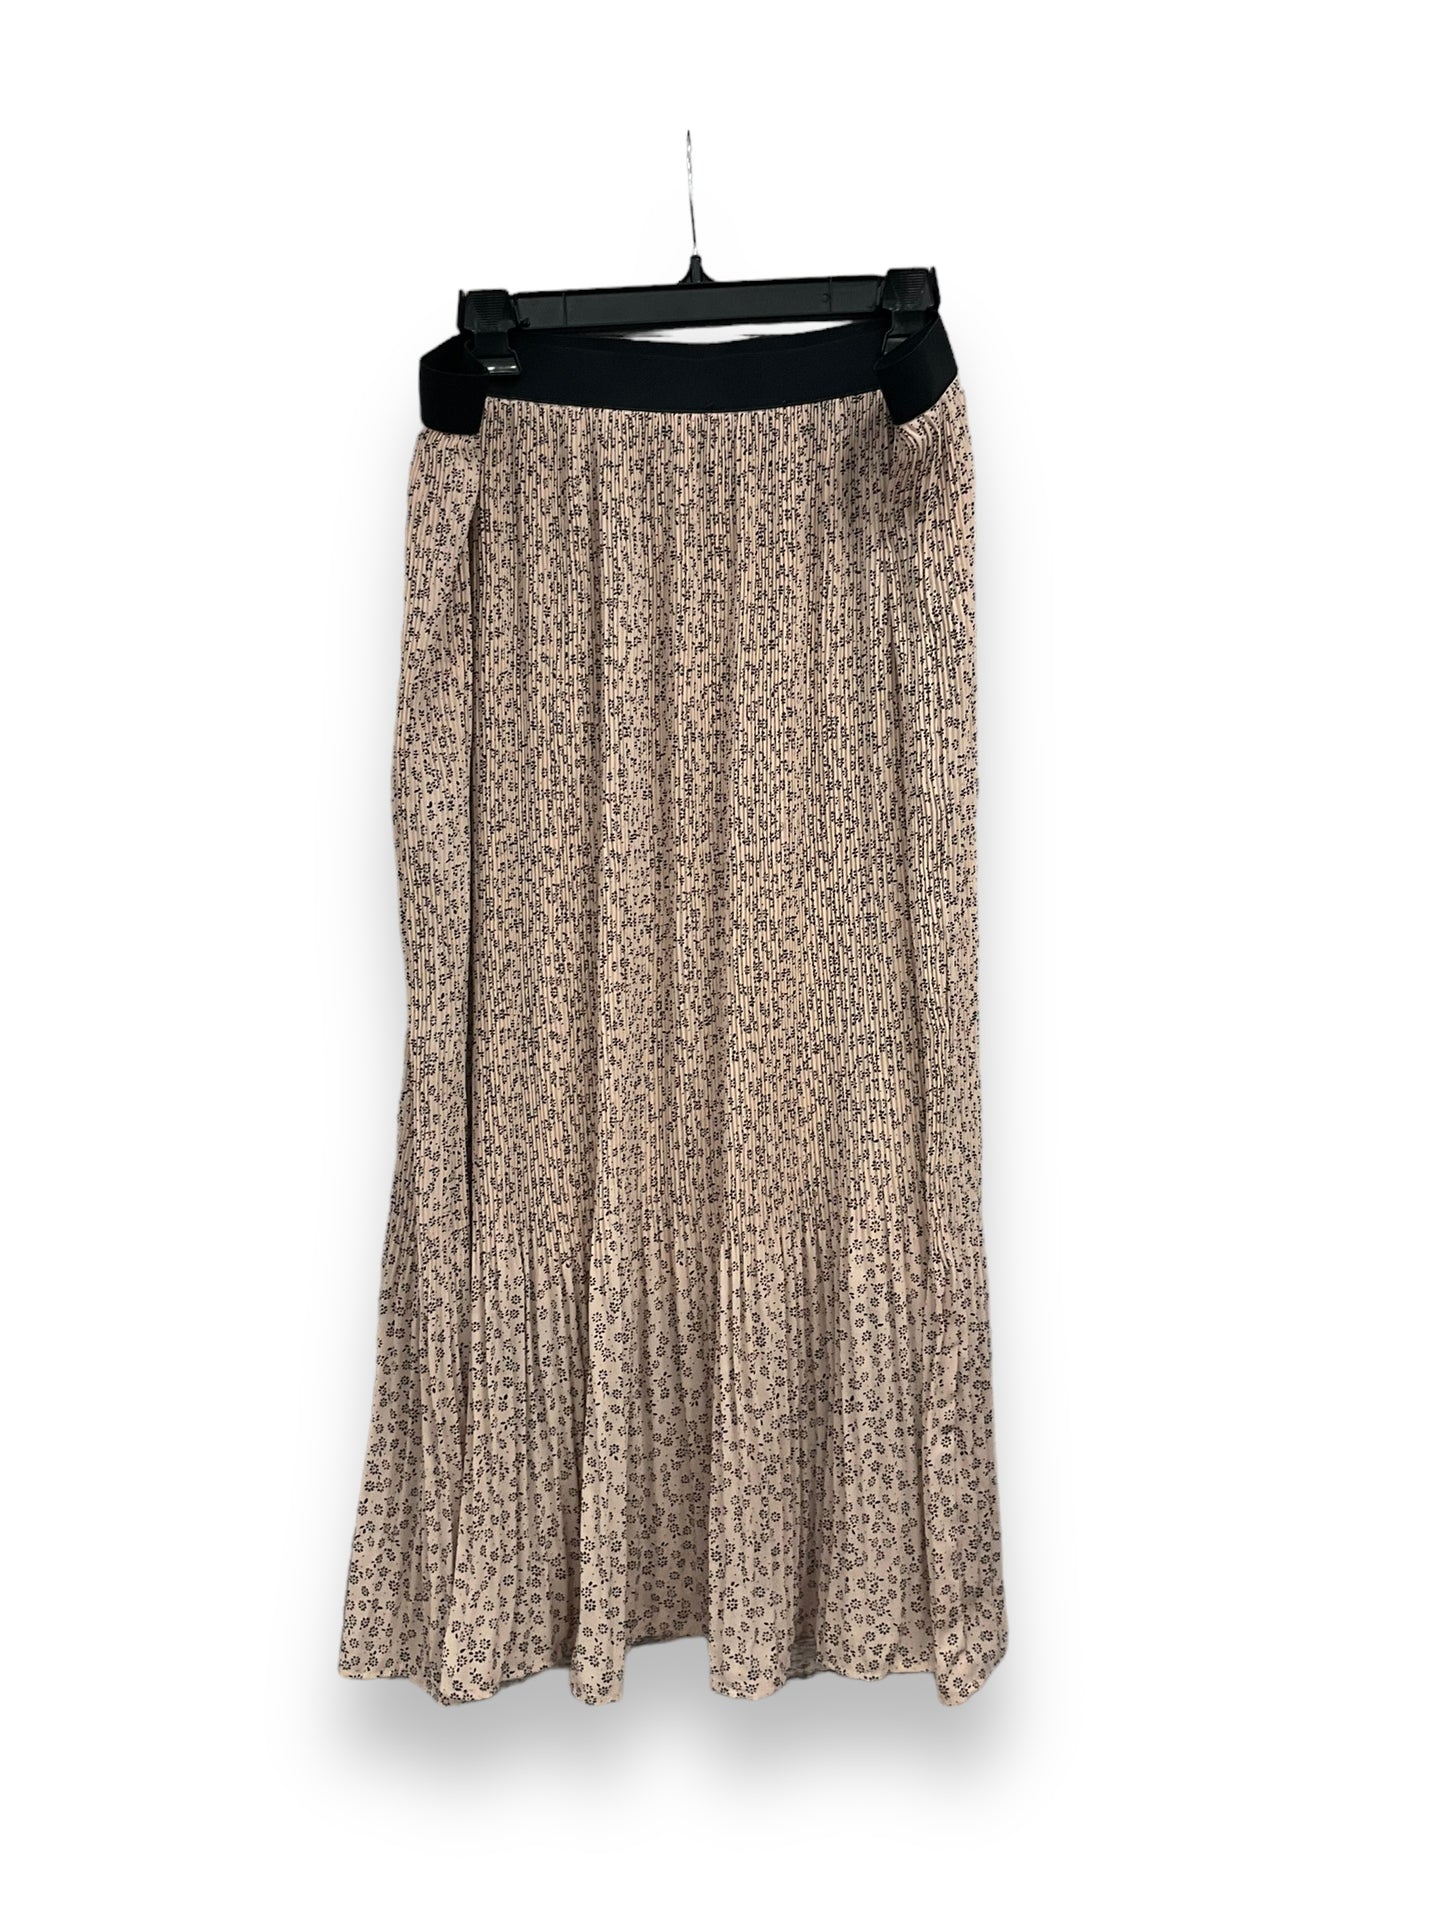 Skirt Maxi By Adrianna Papell  Size: Xl